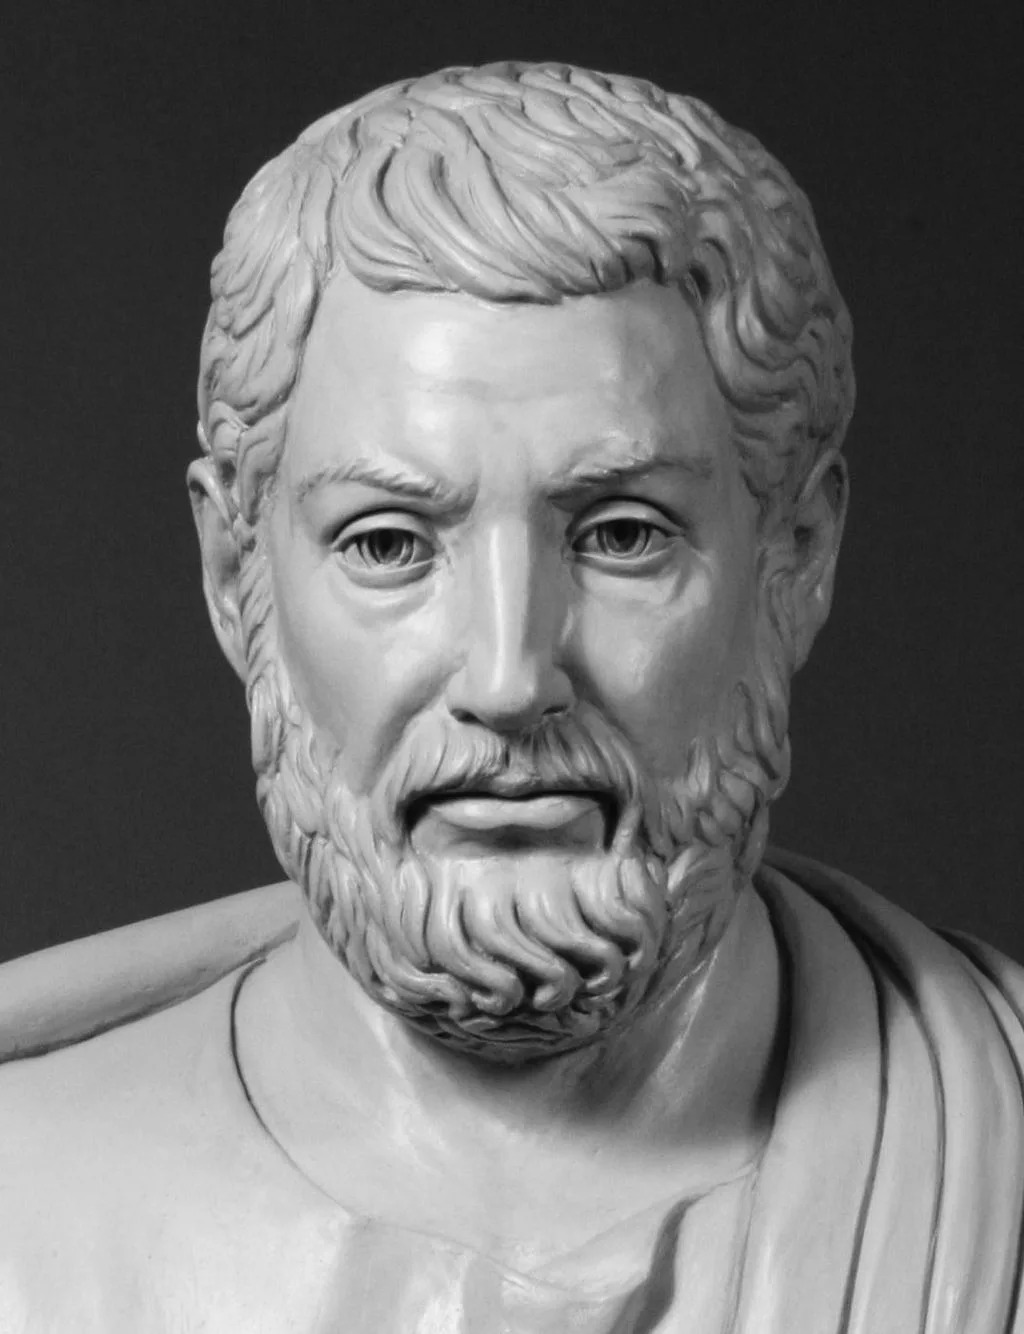 Image of Cleisthenes, the father of Greek democracy